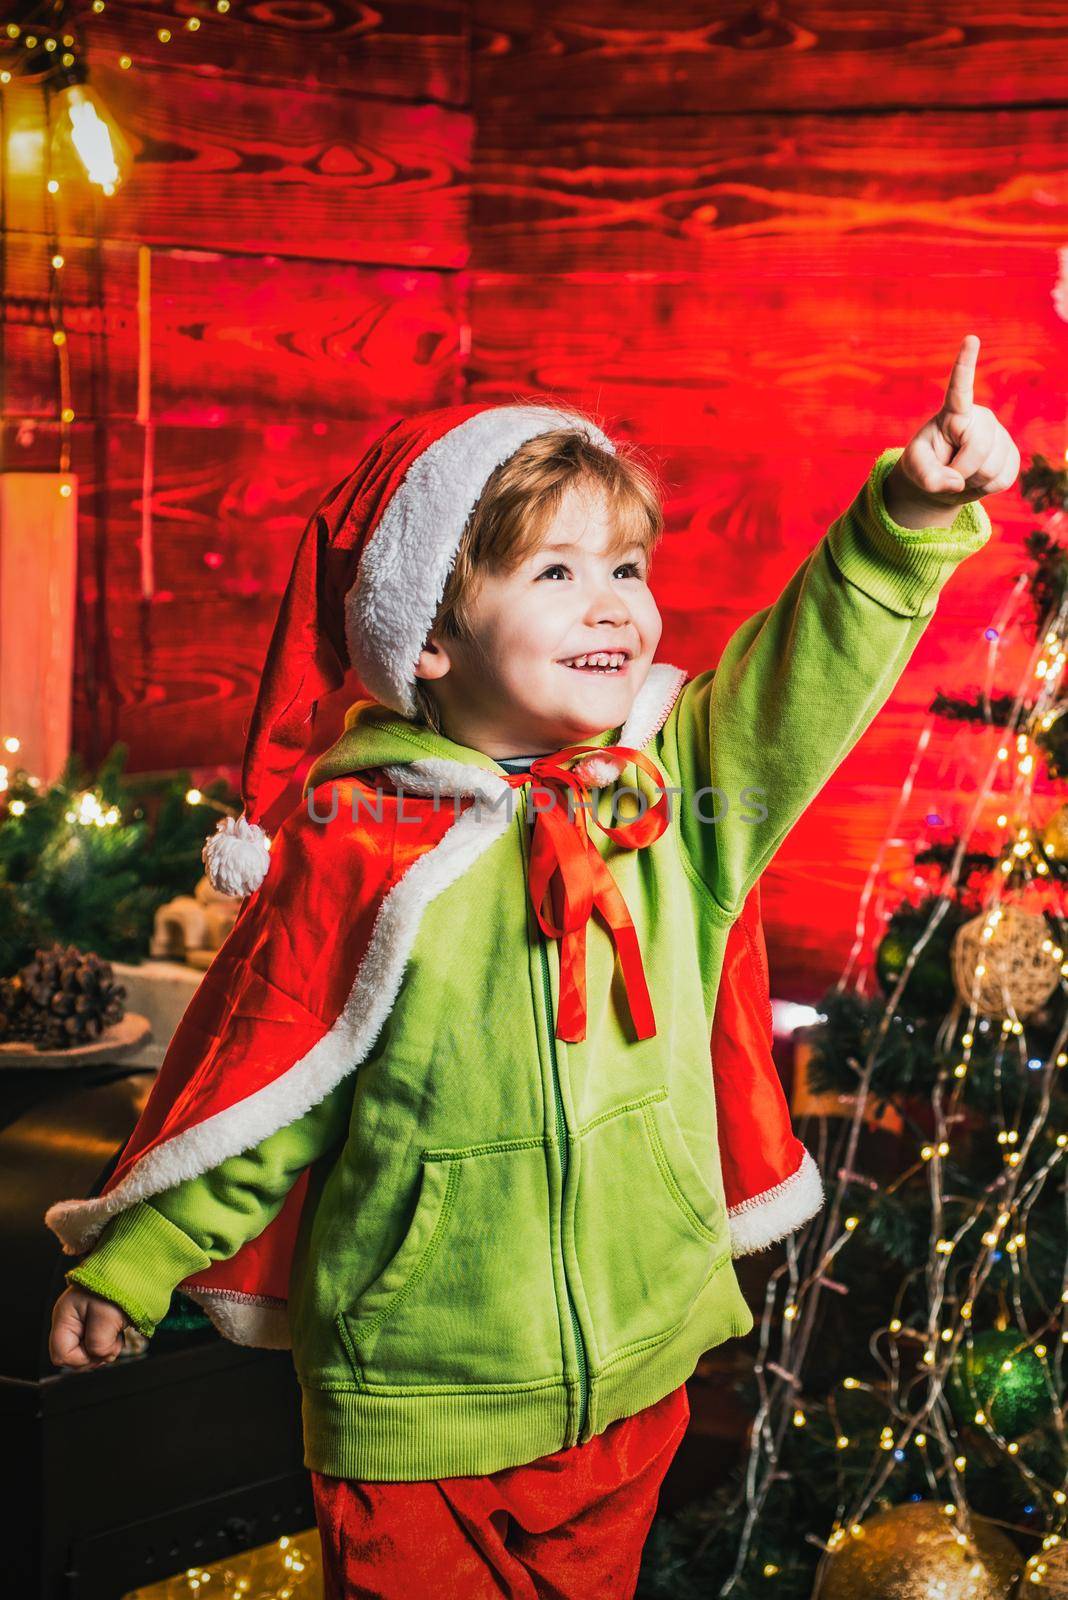 Magic Christmas night for kids. Happy excited smiling boy with pointing finger by the Christmas tree. Little kid is wearing Santa clothes